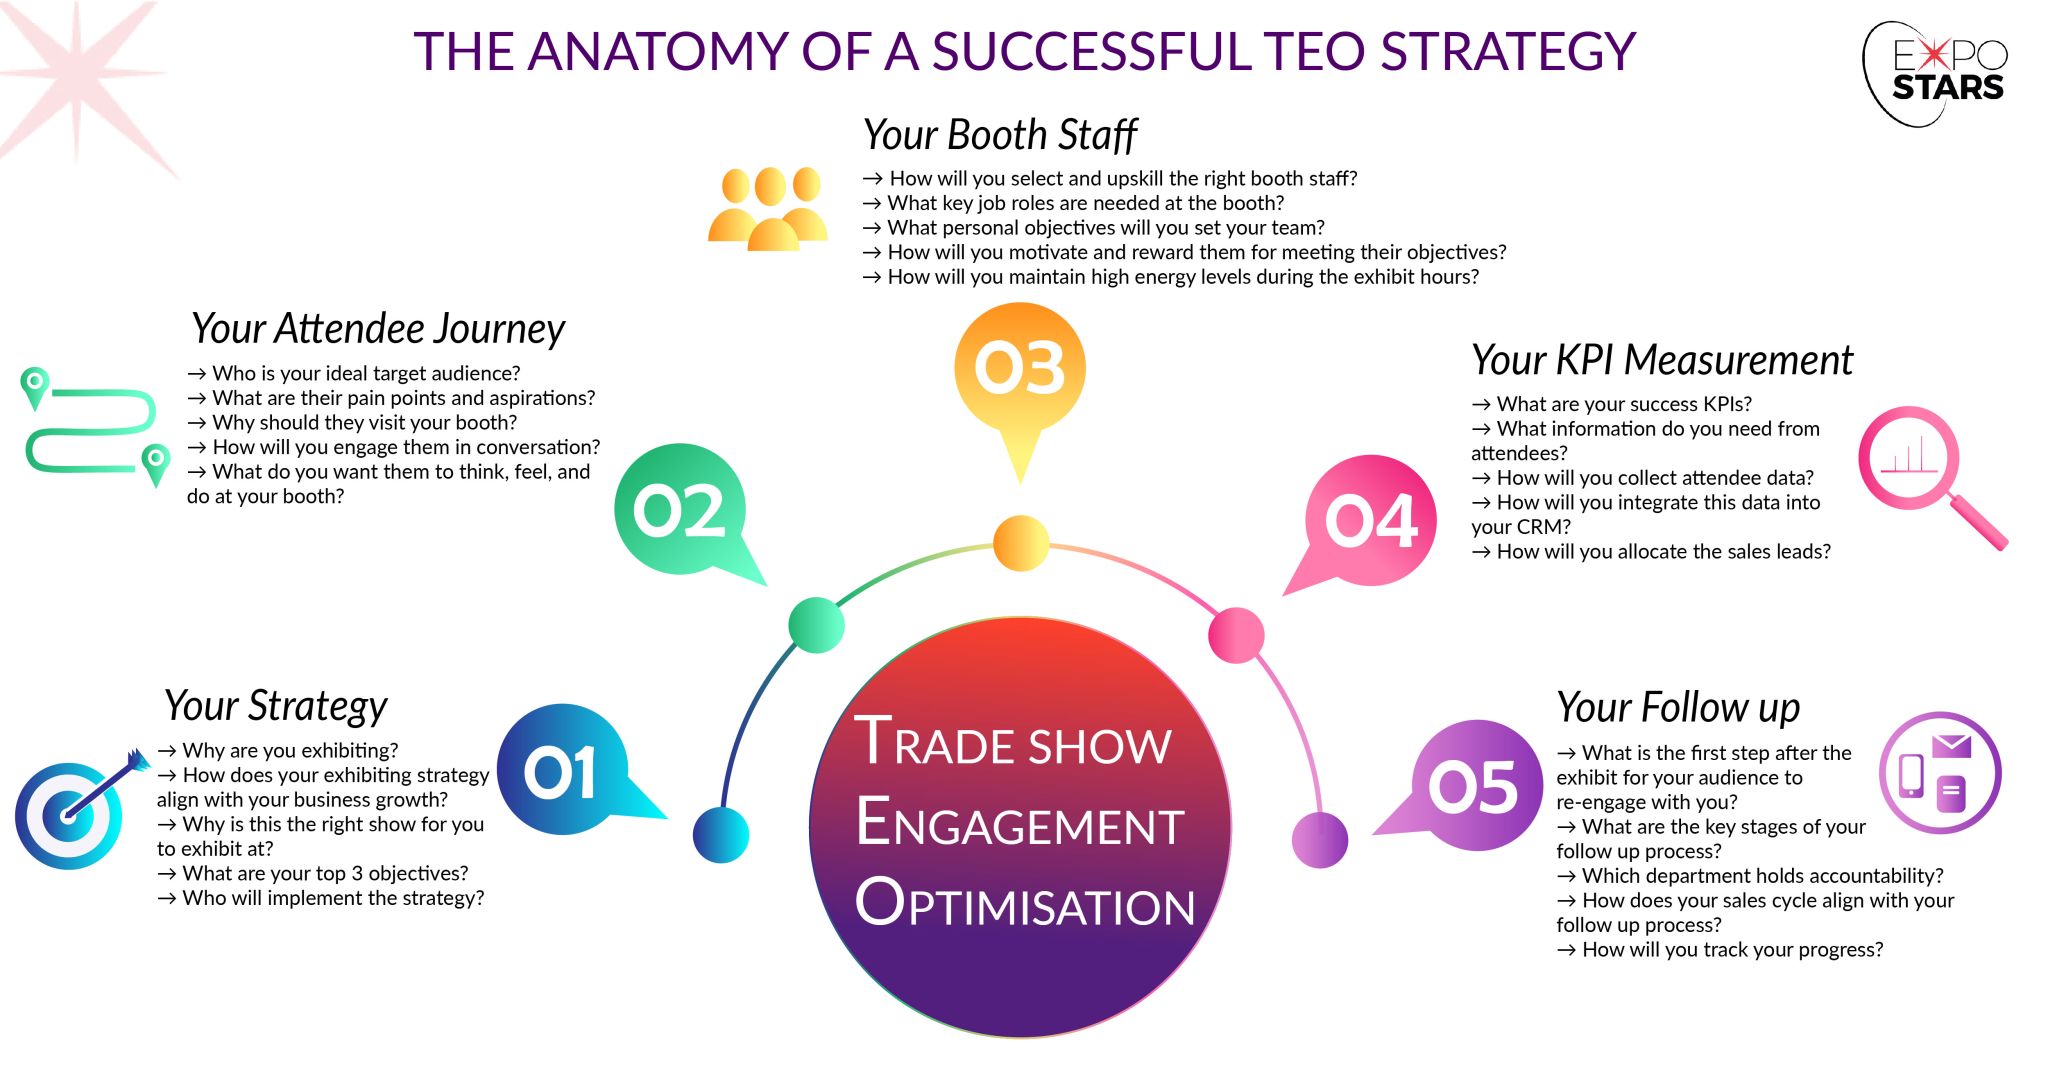 The Anatomy of a Successful TEO Strategy